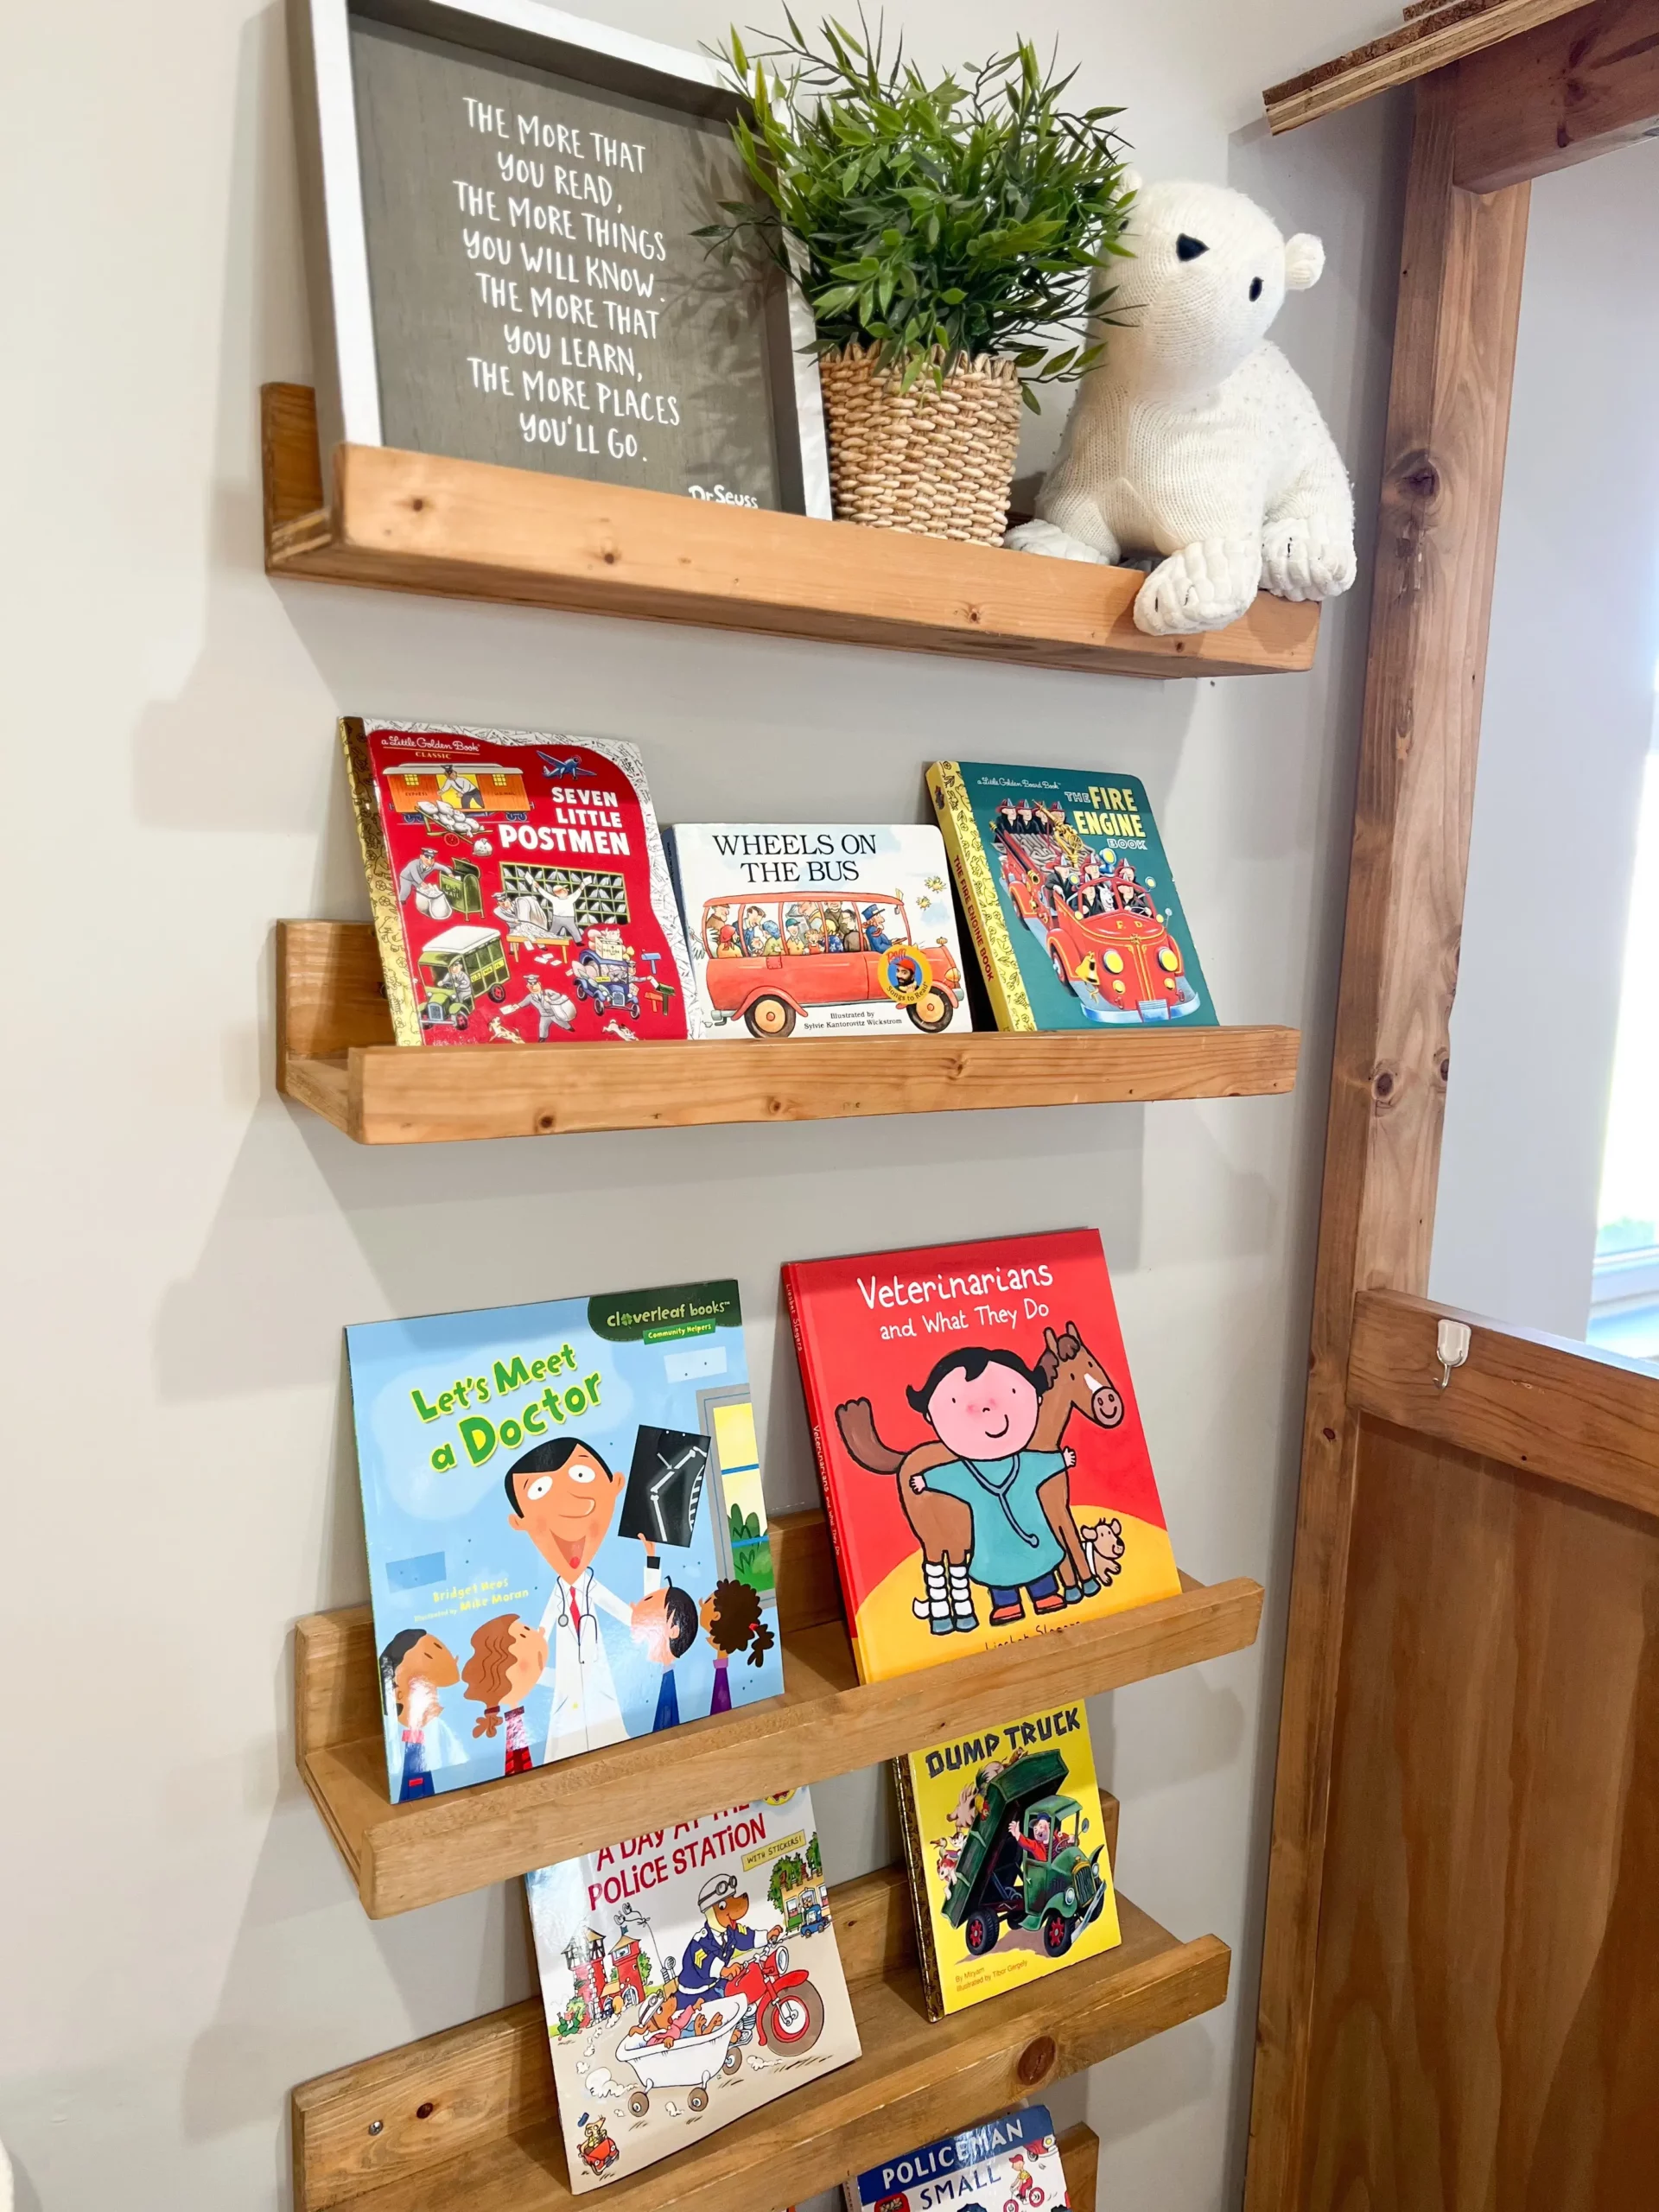 adorable wooden shelves with various children's books and other kids' decor